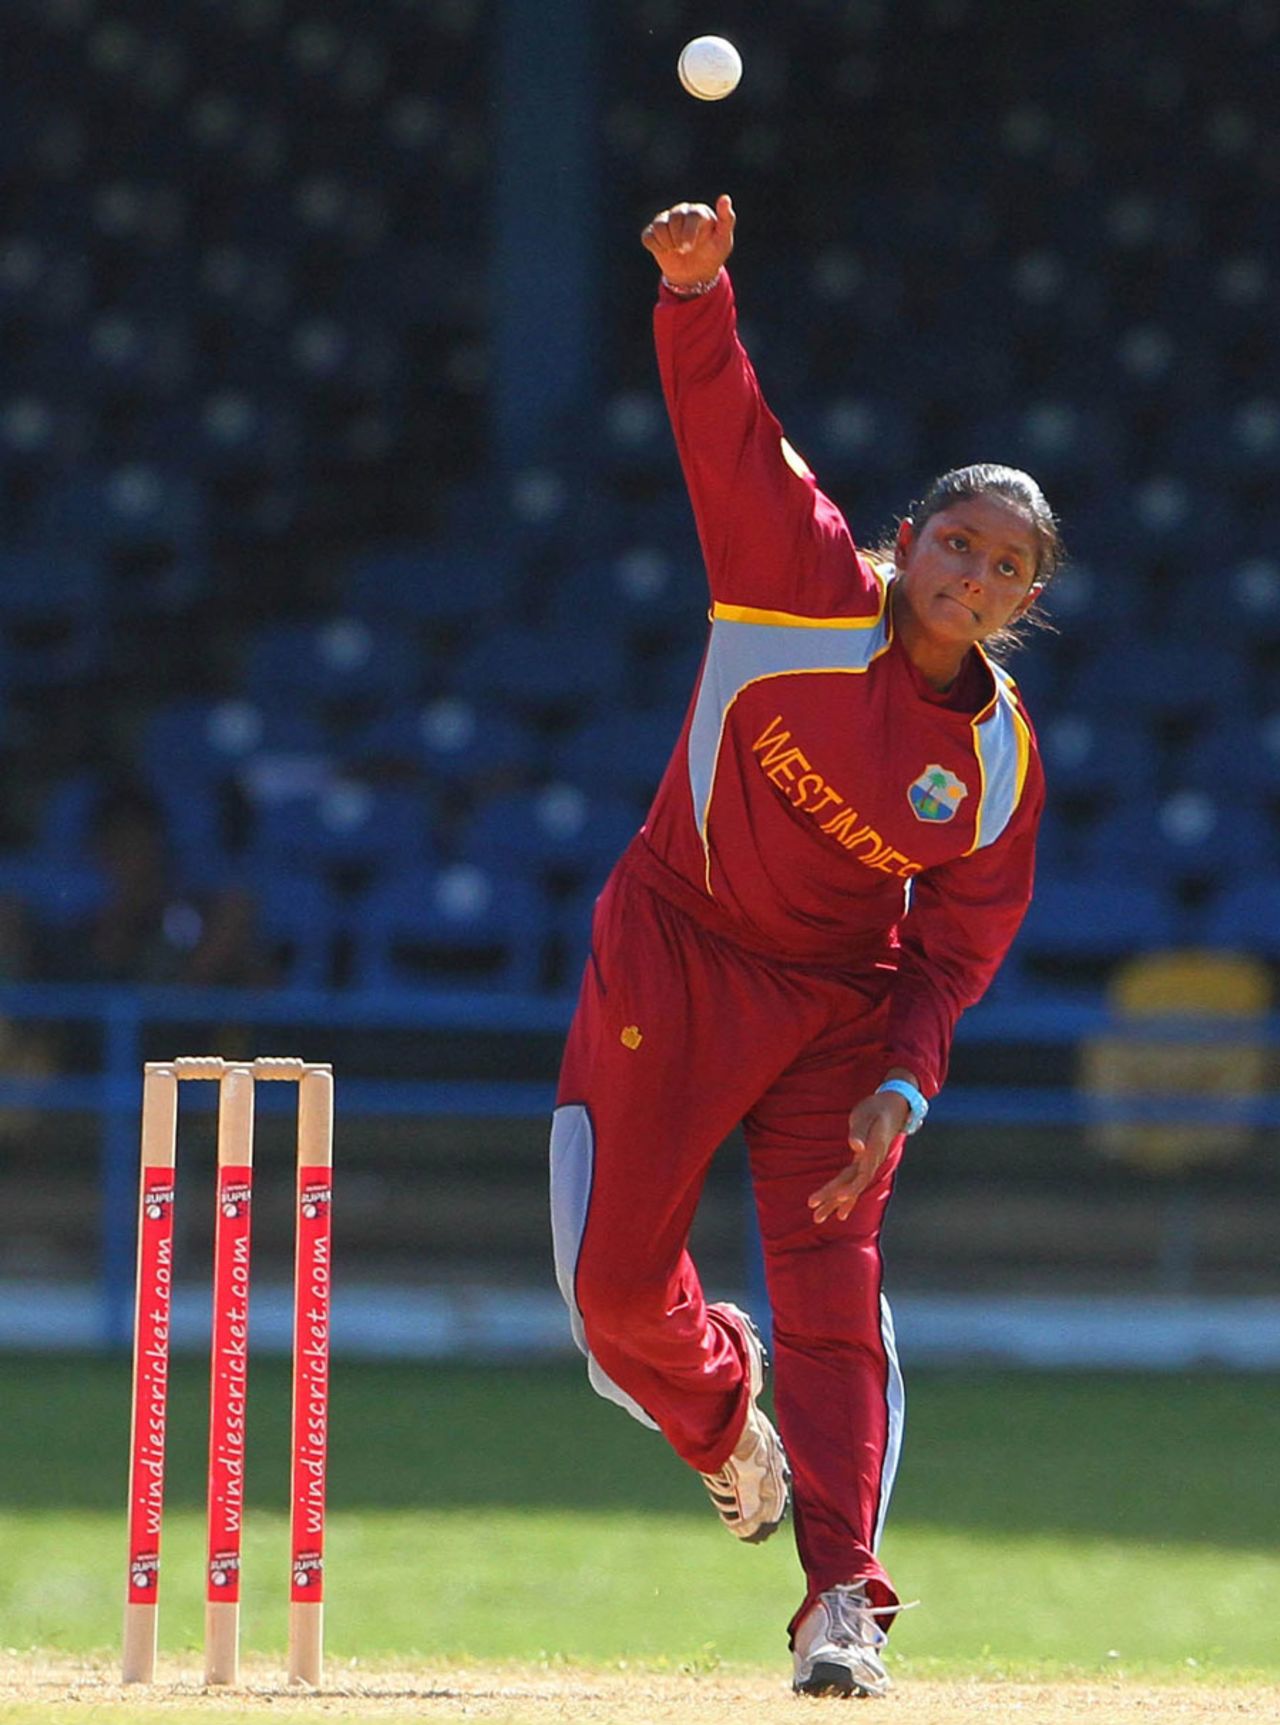 Anisa Mohammed in her delivery stride, West Indies Women v England Women, 3rd ODI, Port of Spain, Trinidad, November 3, 2013